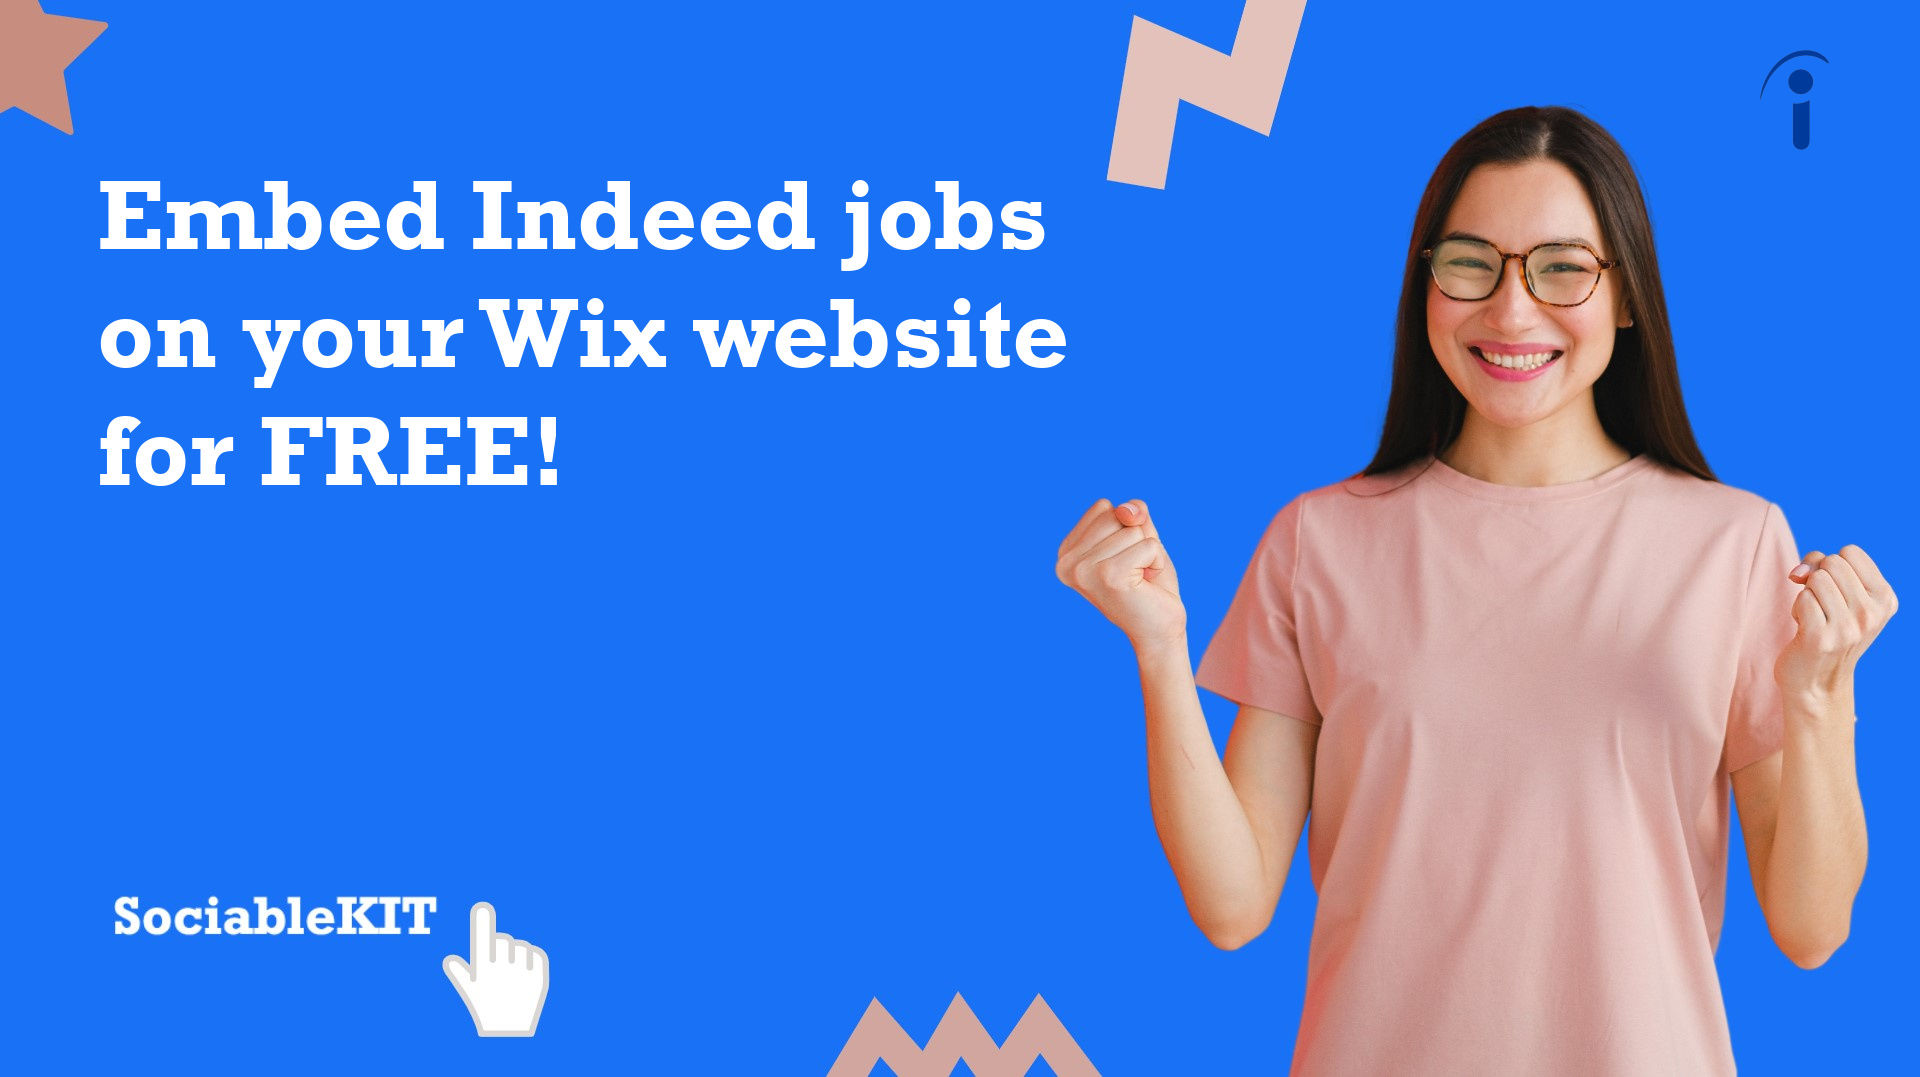 How to embed Indeed jobs on your Wix website for FREE?